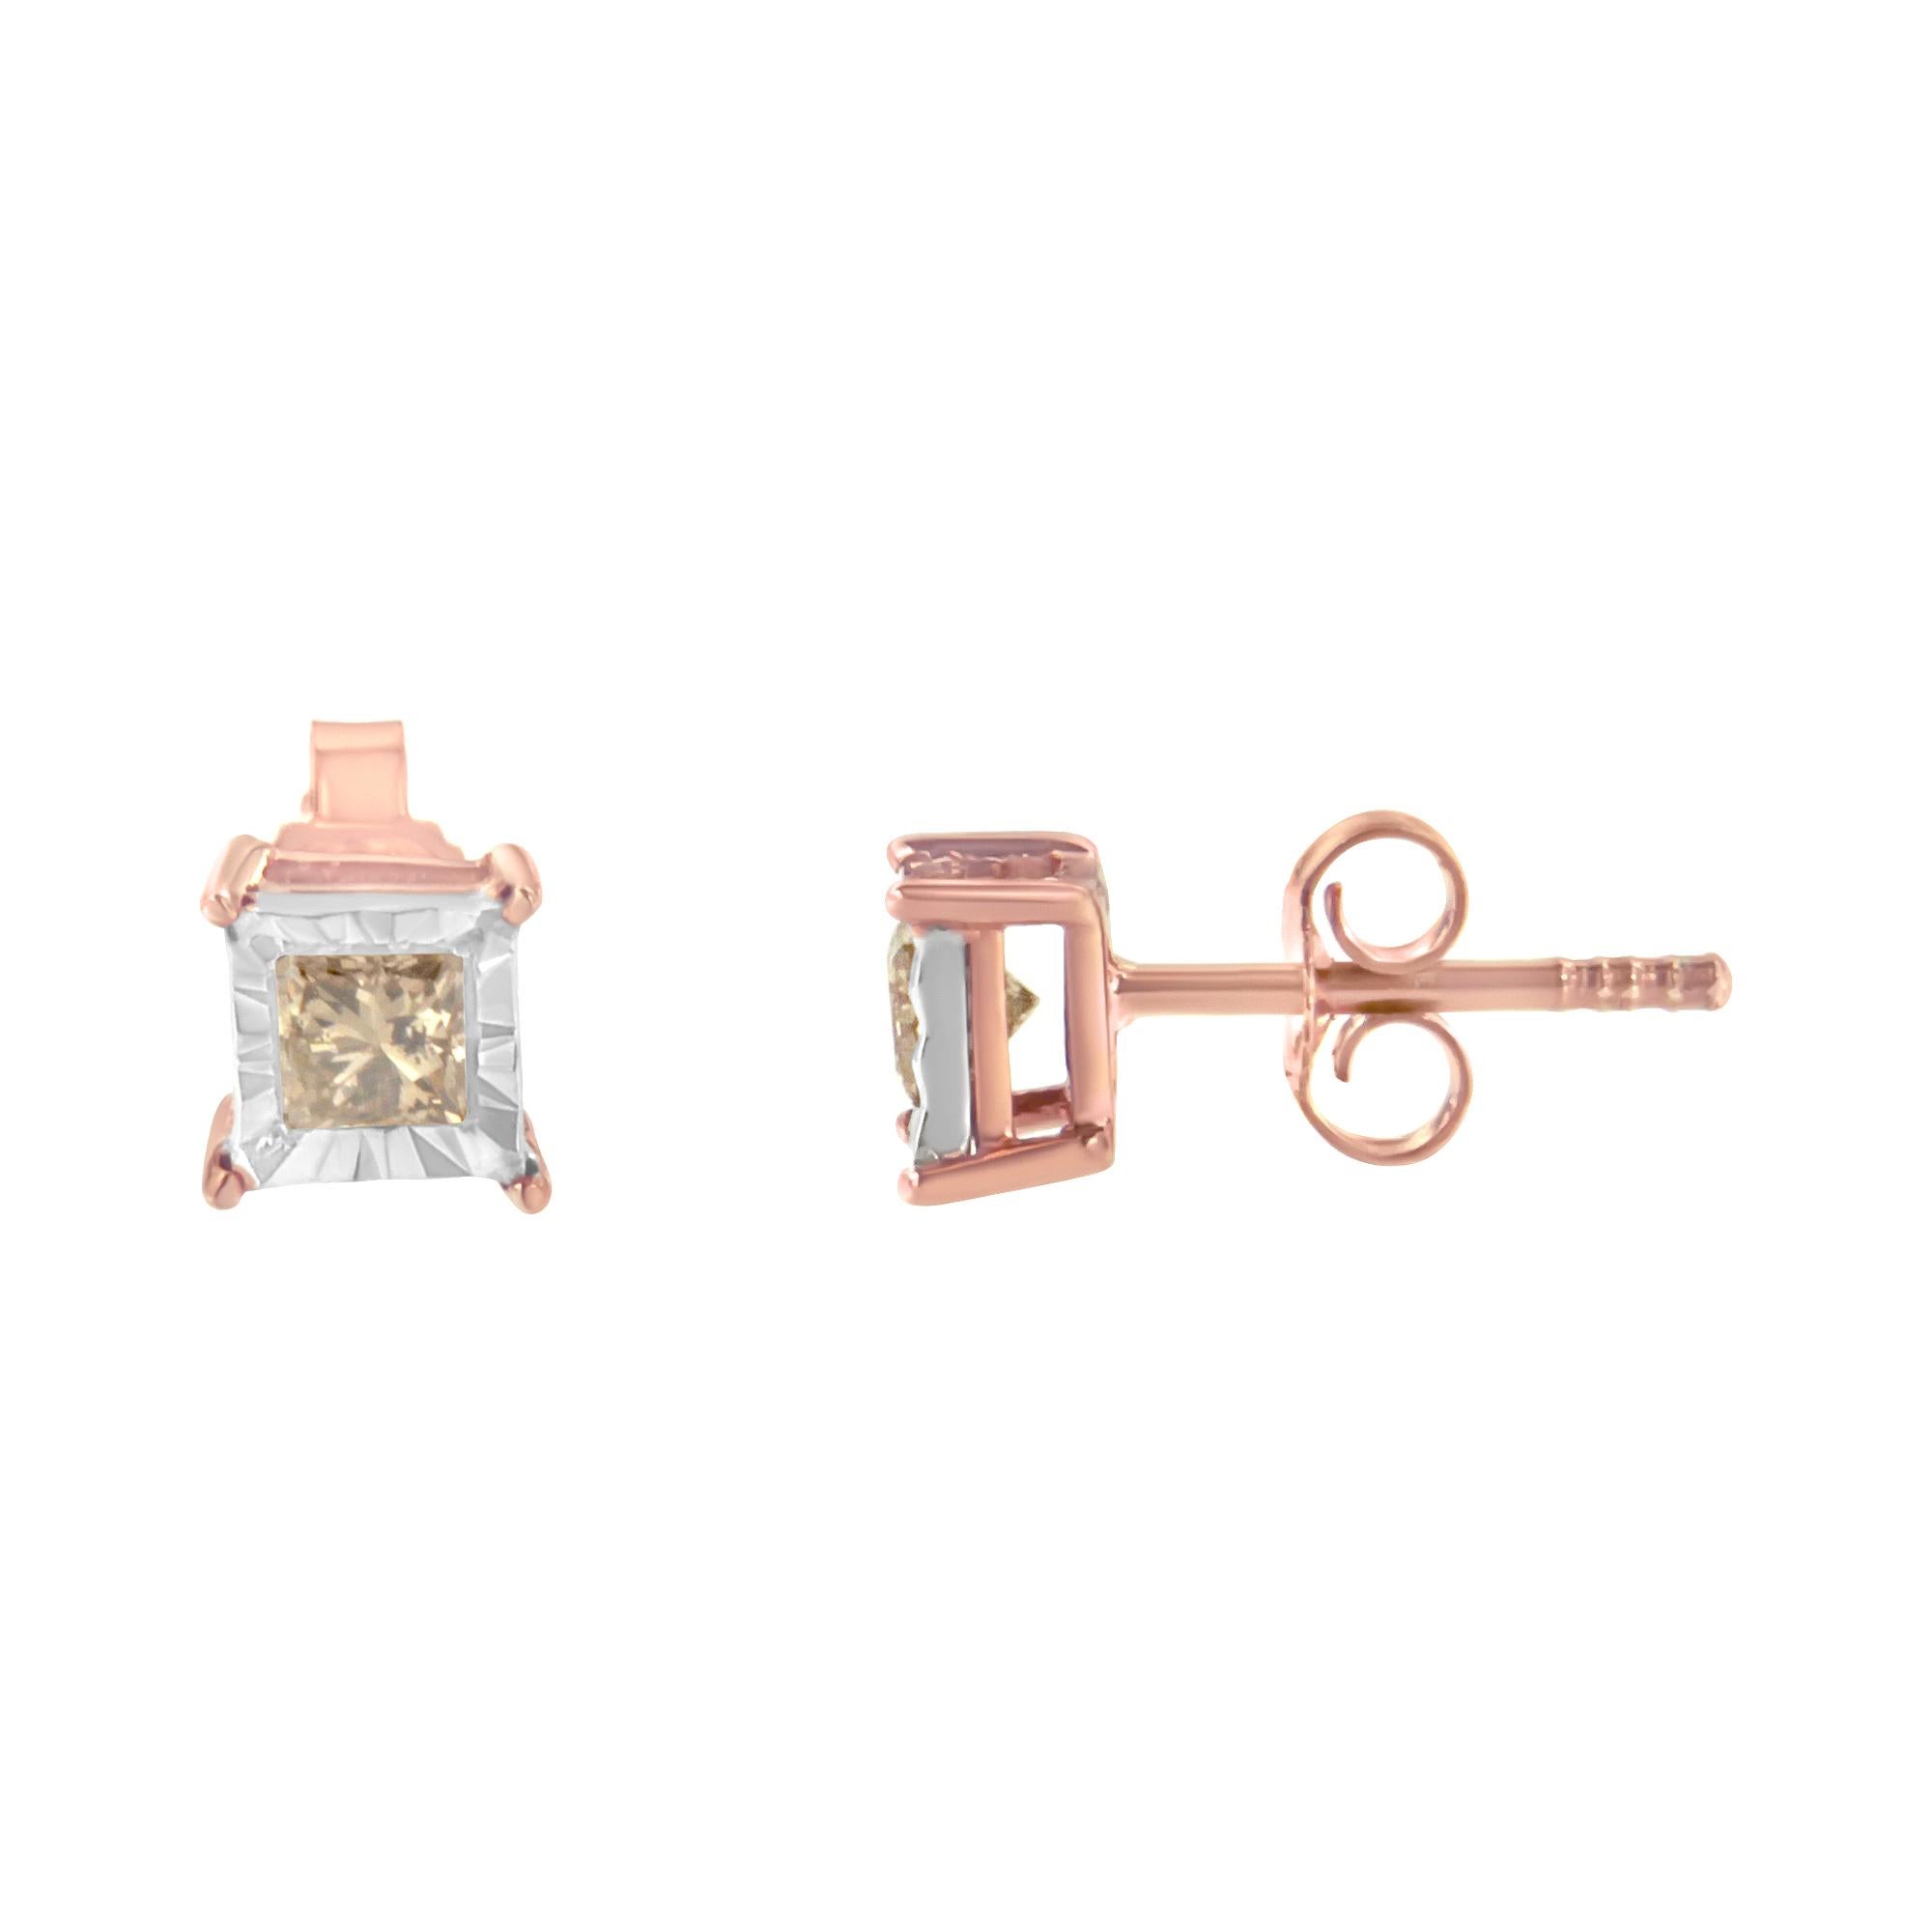 This charming pair of diamond studs features miracle set princess cut diamonds. The unique design is crafted in 2 micron plated rose gold plated sterling silver making them the perfect accessory to add sparkle to any outfit. The total diamond weight